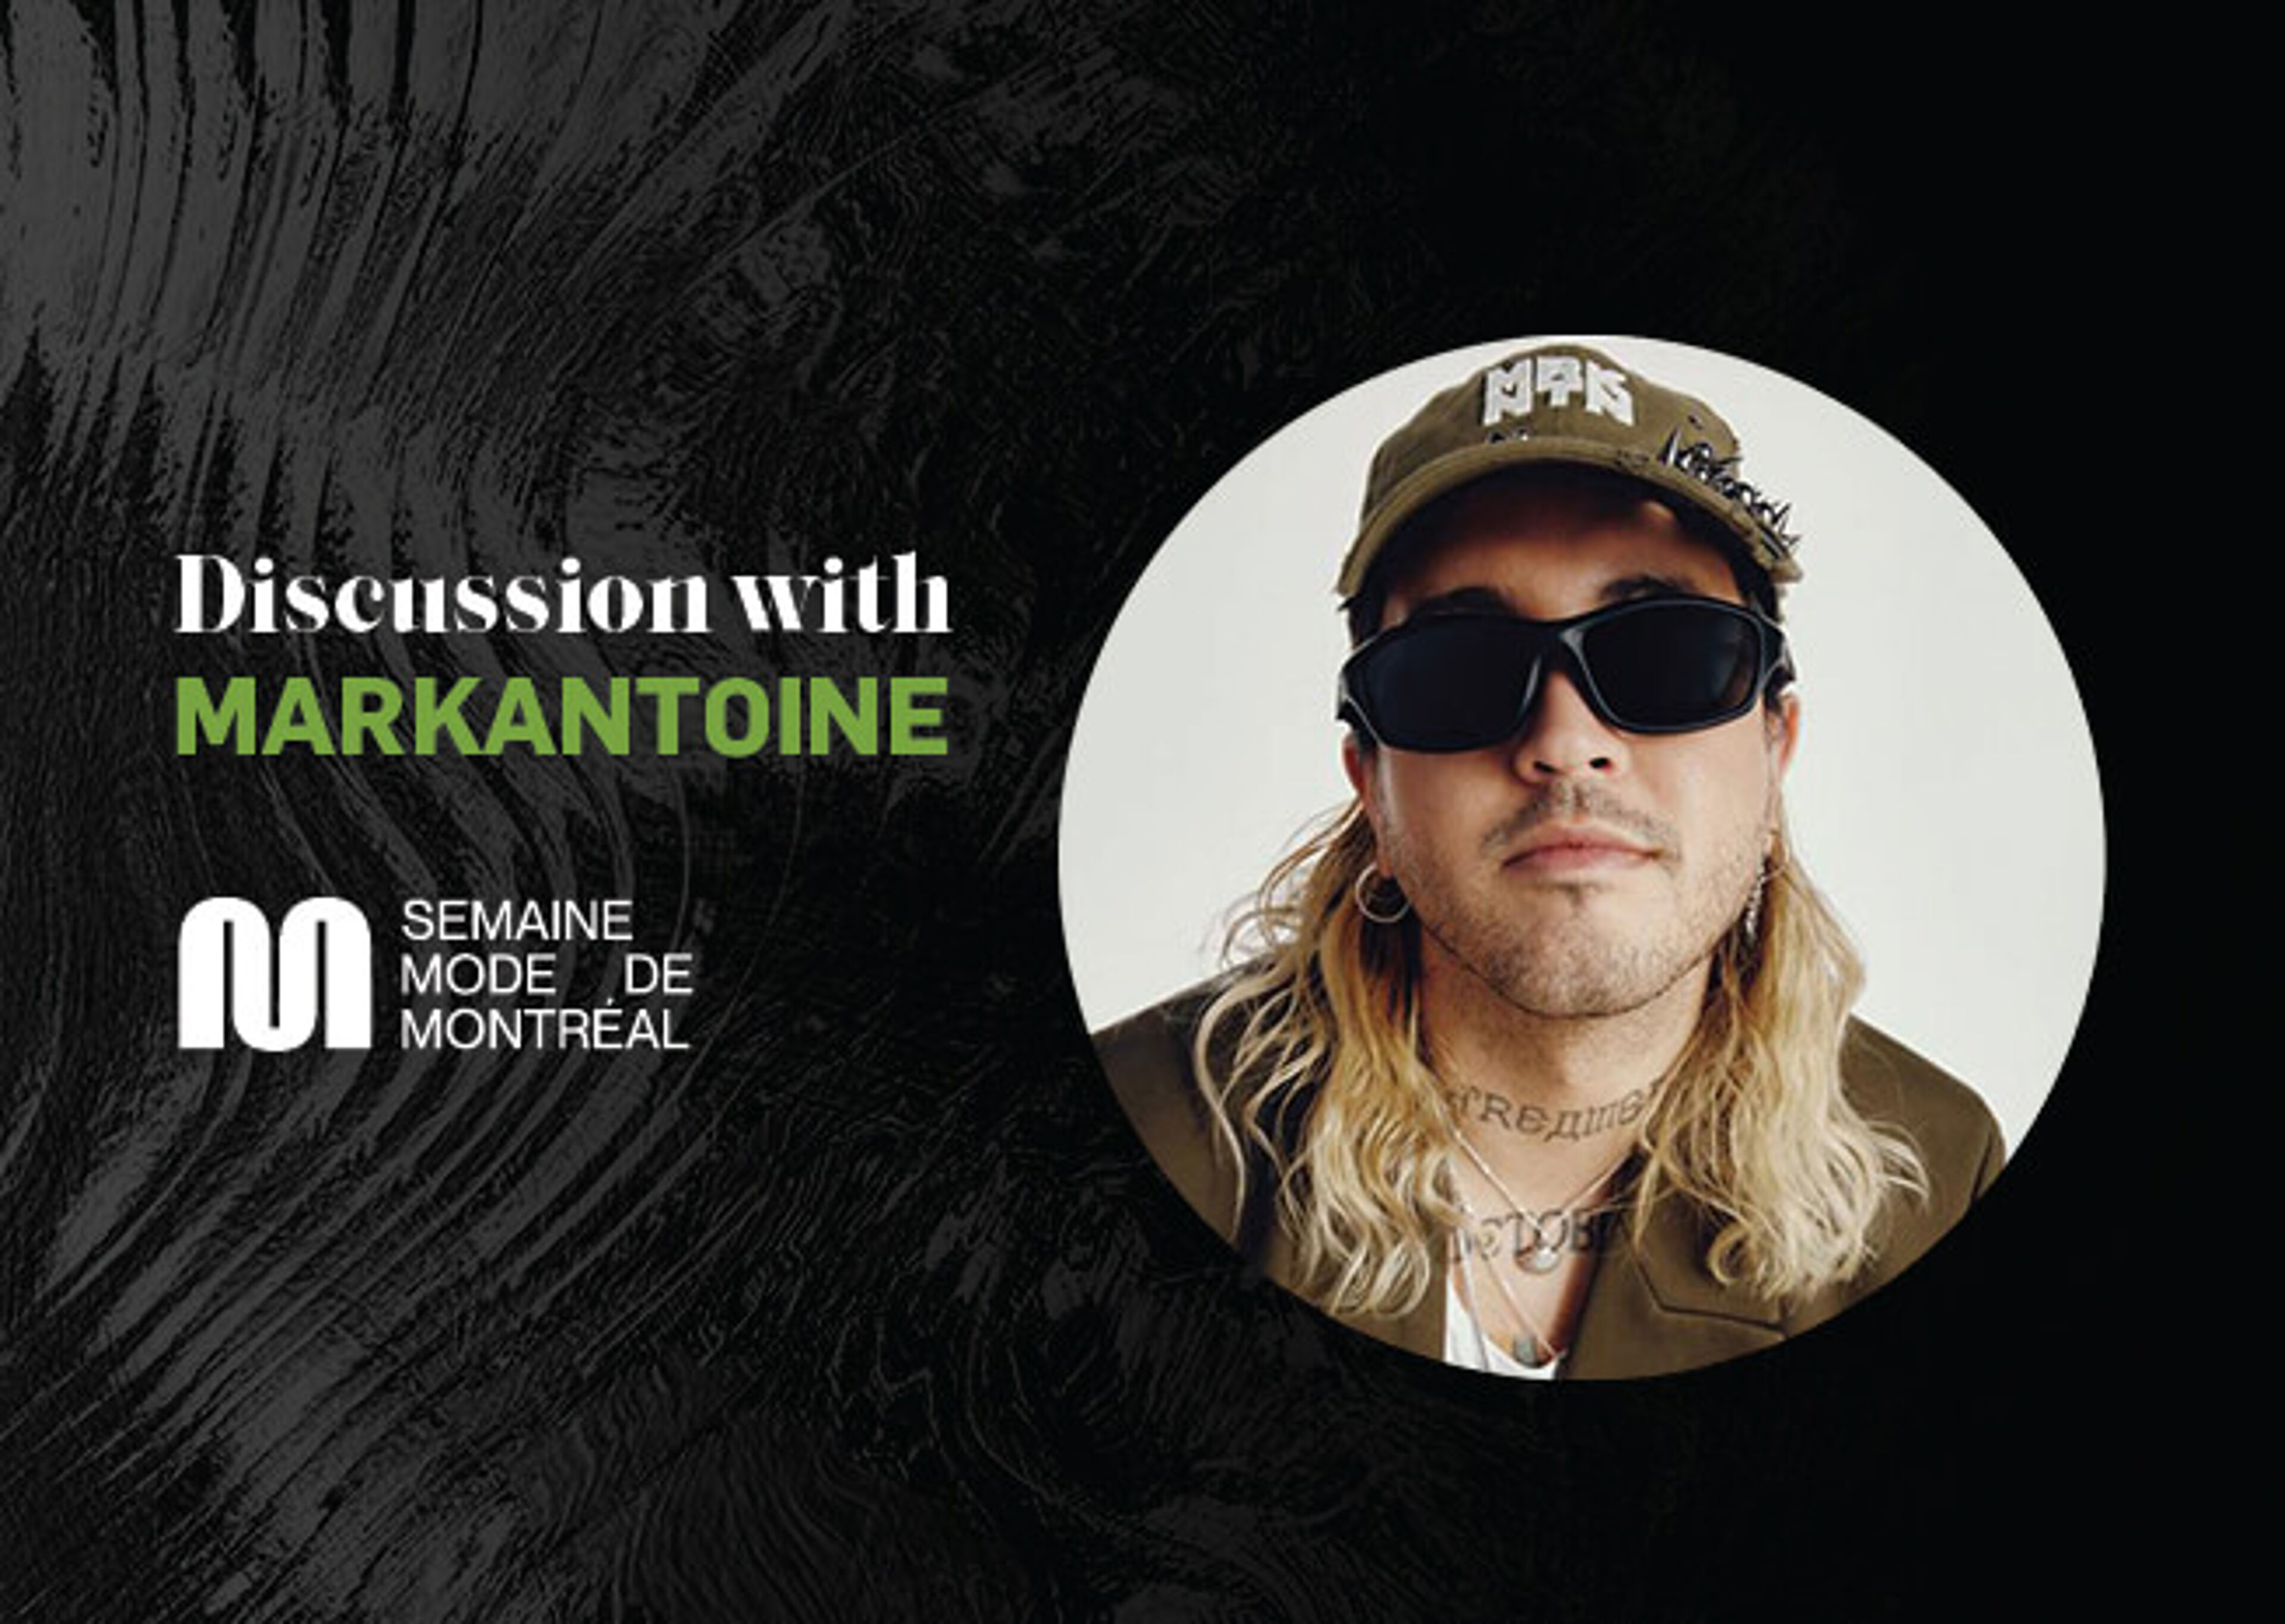 Promotional material for a discussion with fashion figure MARKANTOINE during Montreal Fashion Week.